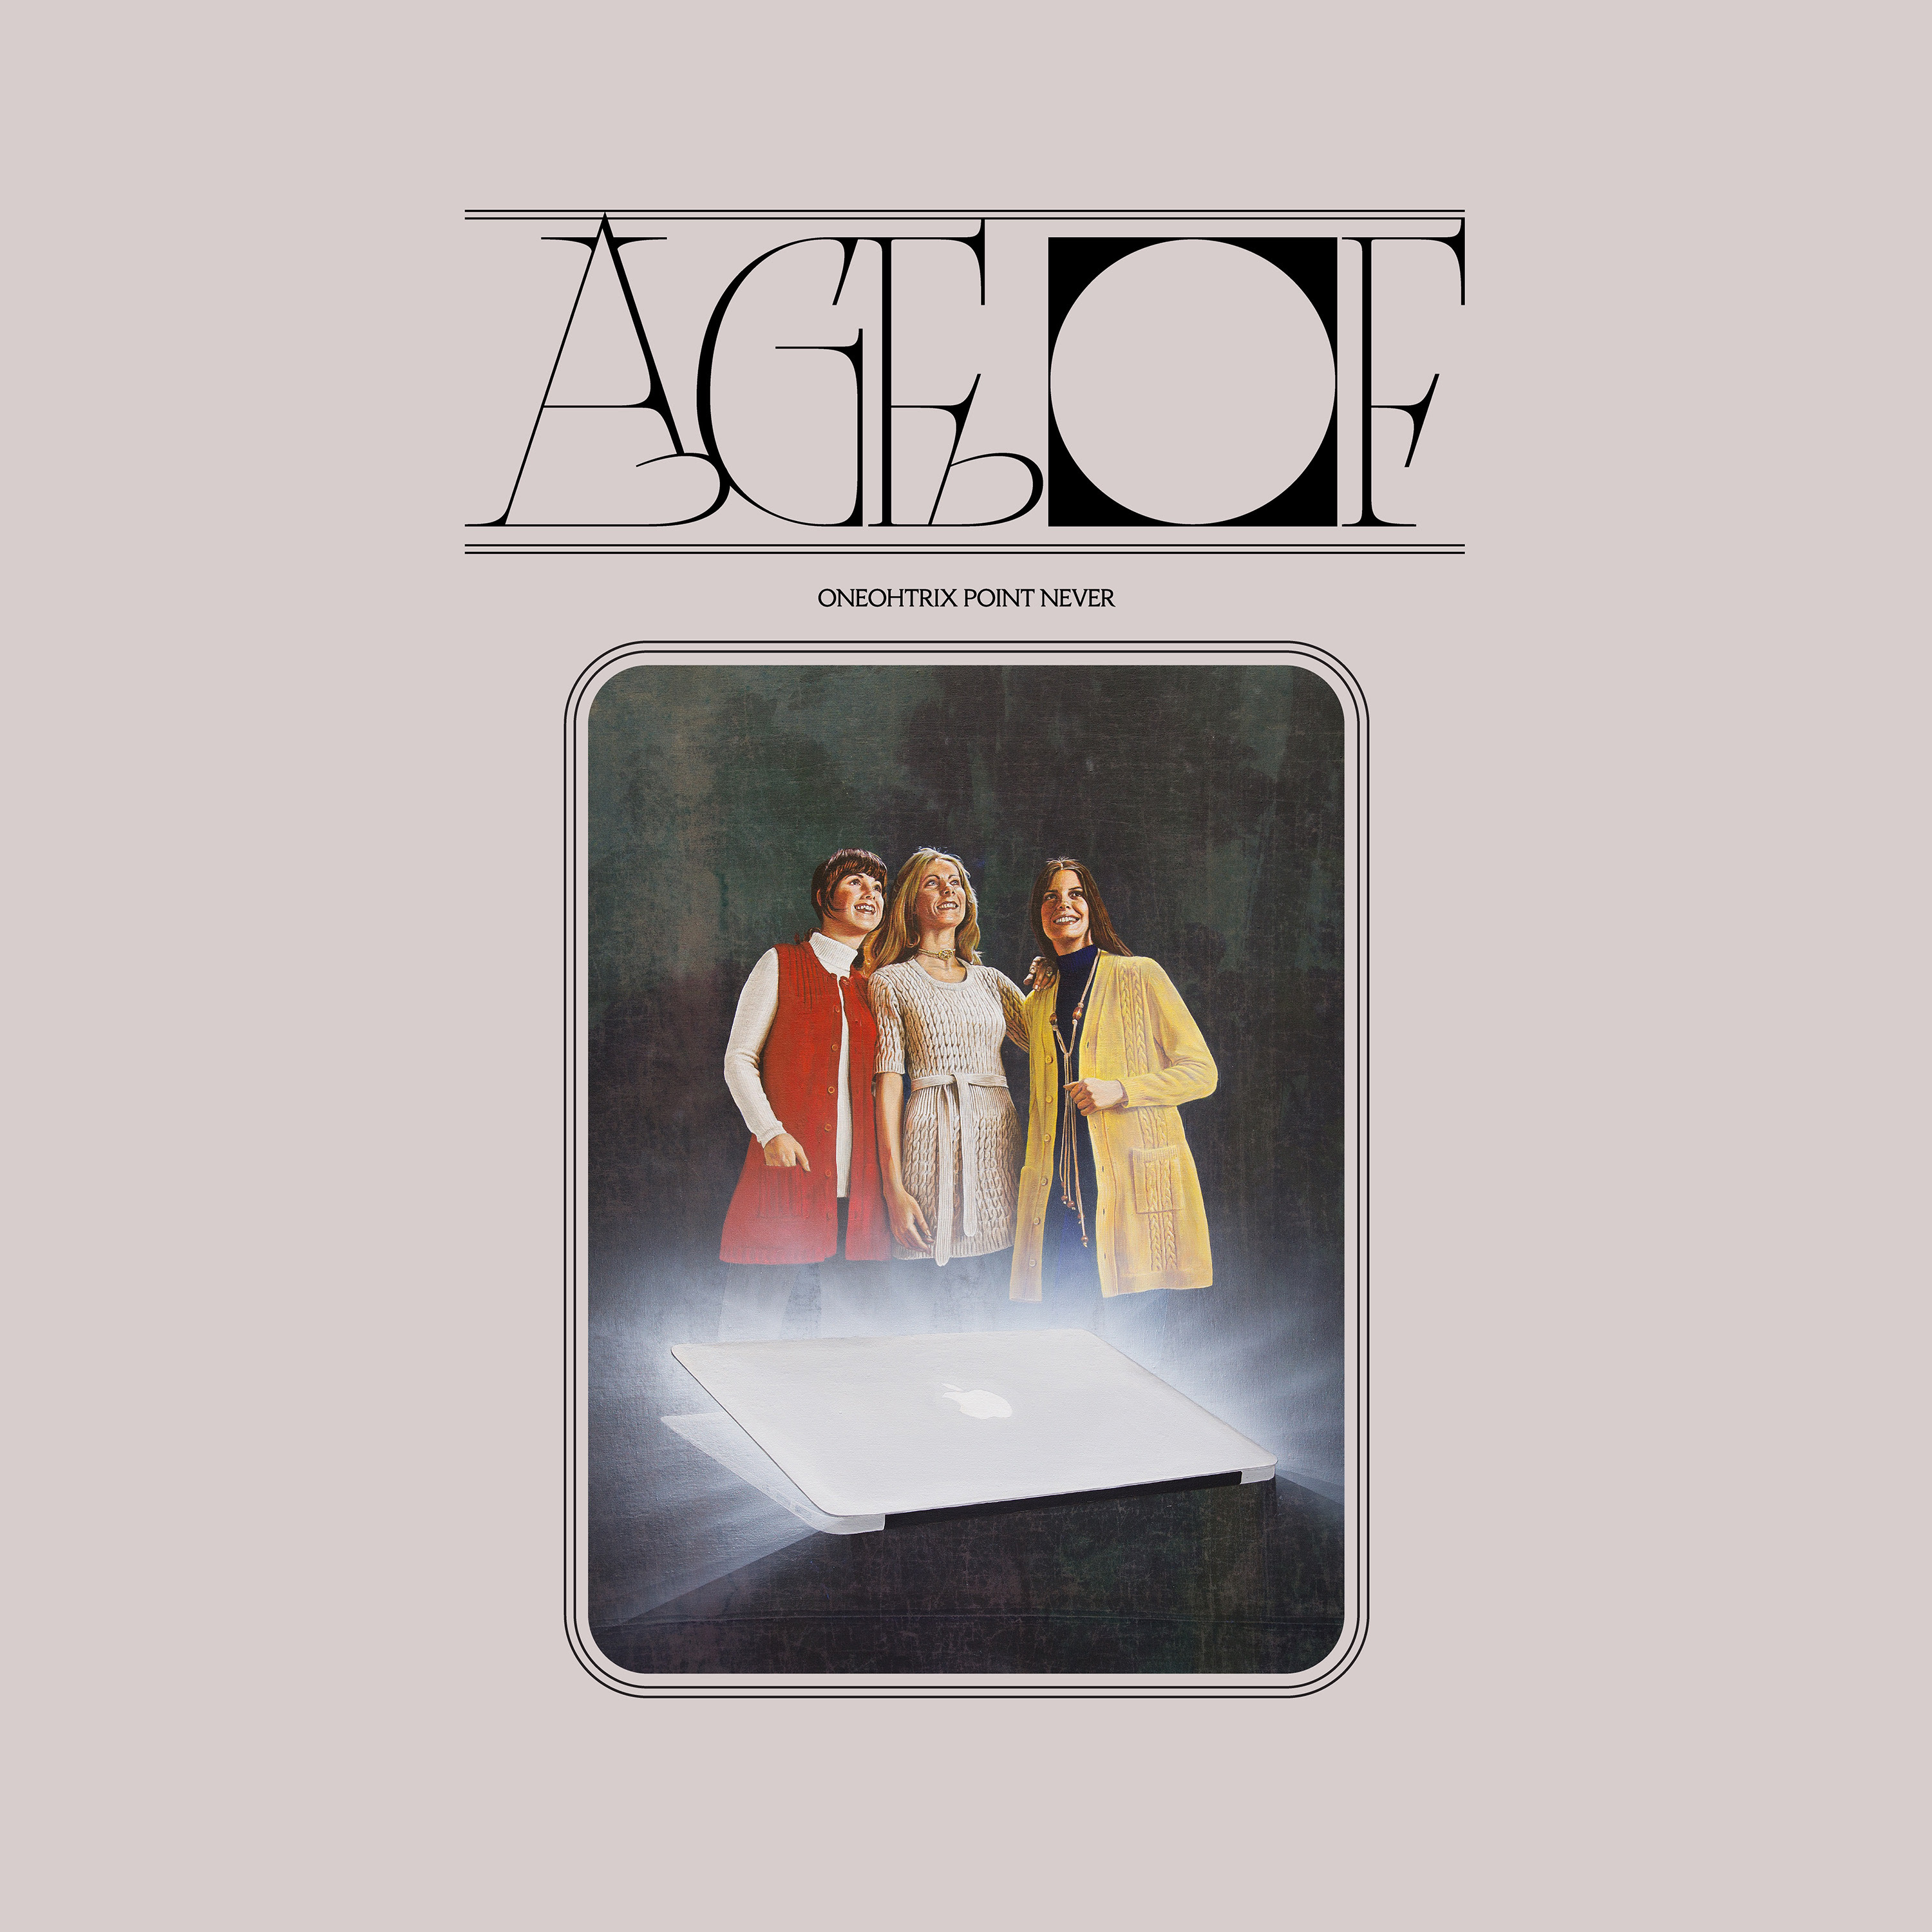 Oneohtrix Point Never Announces New Album <i></noscript>Age Of</i>” title=”unnamed-39-1522858489″ data-original-id=”284639″ data-adjusted-id=”284639″ class=”sm_size_full_width sm_alignment_center ” data-image-source=”getty” />
</div>
</div>
</div>
</div>
</div>
</section>
<section data-particle_enable=